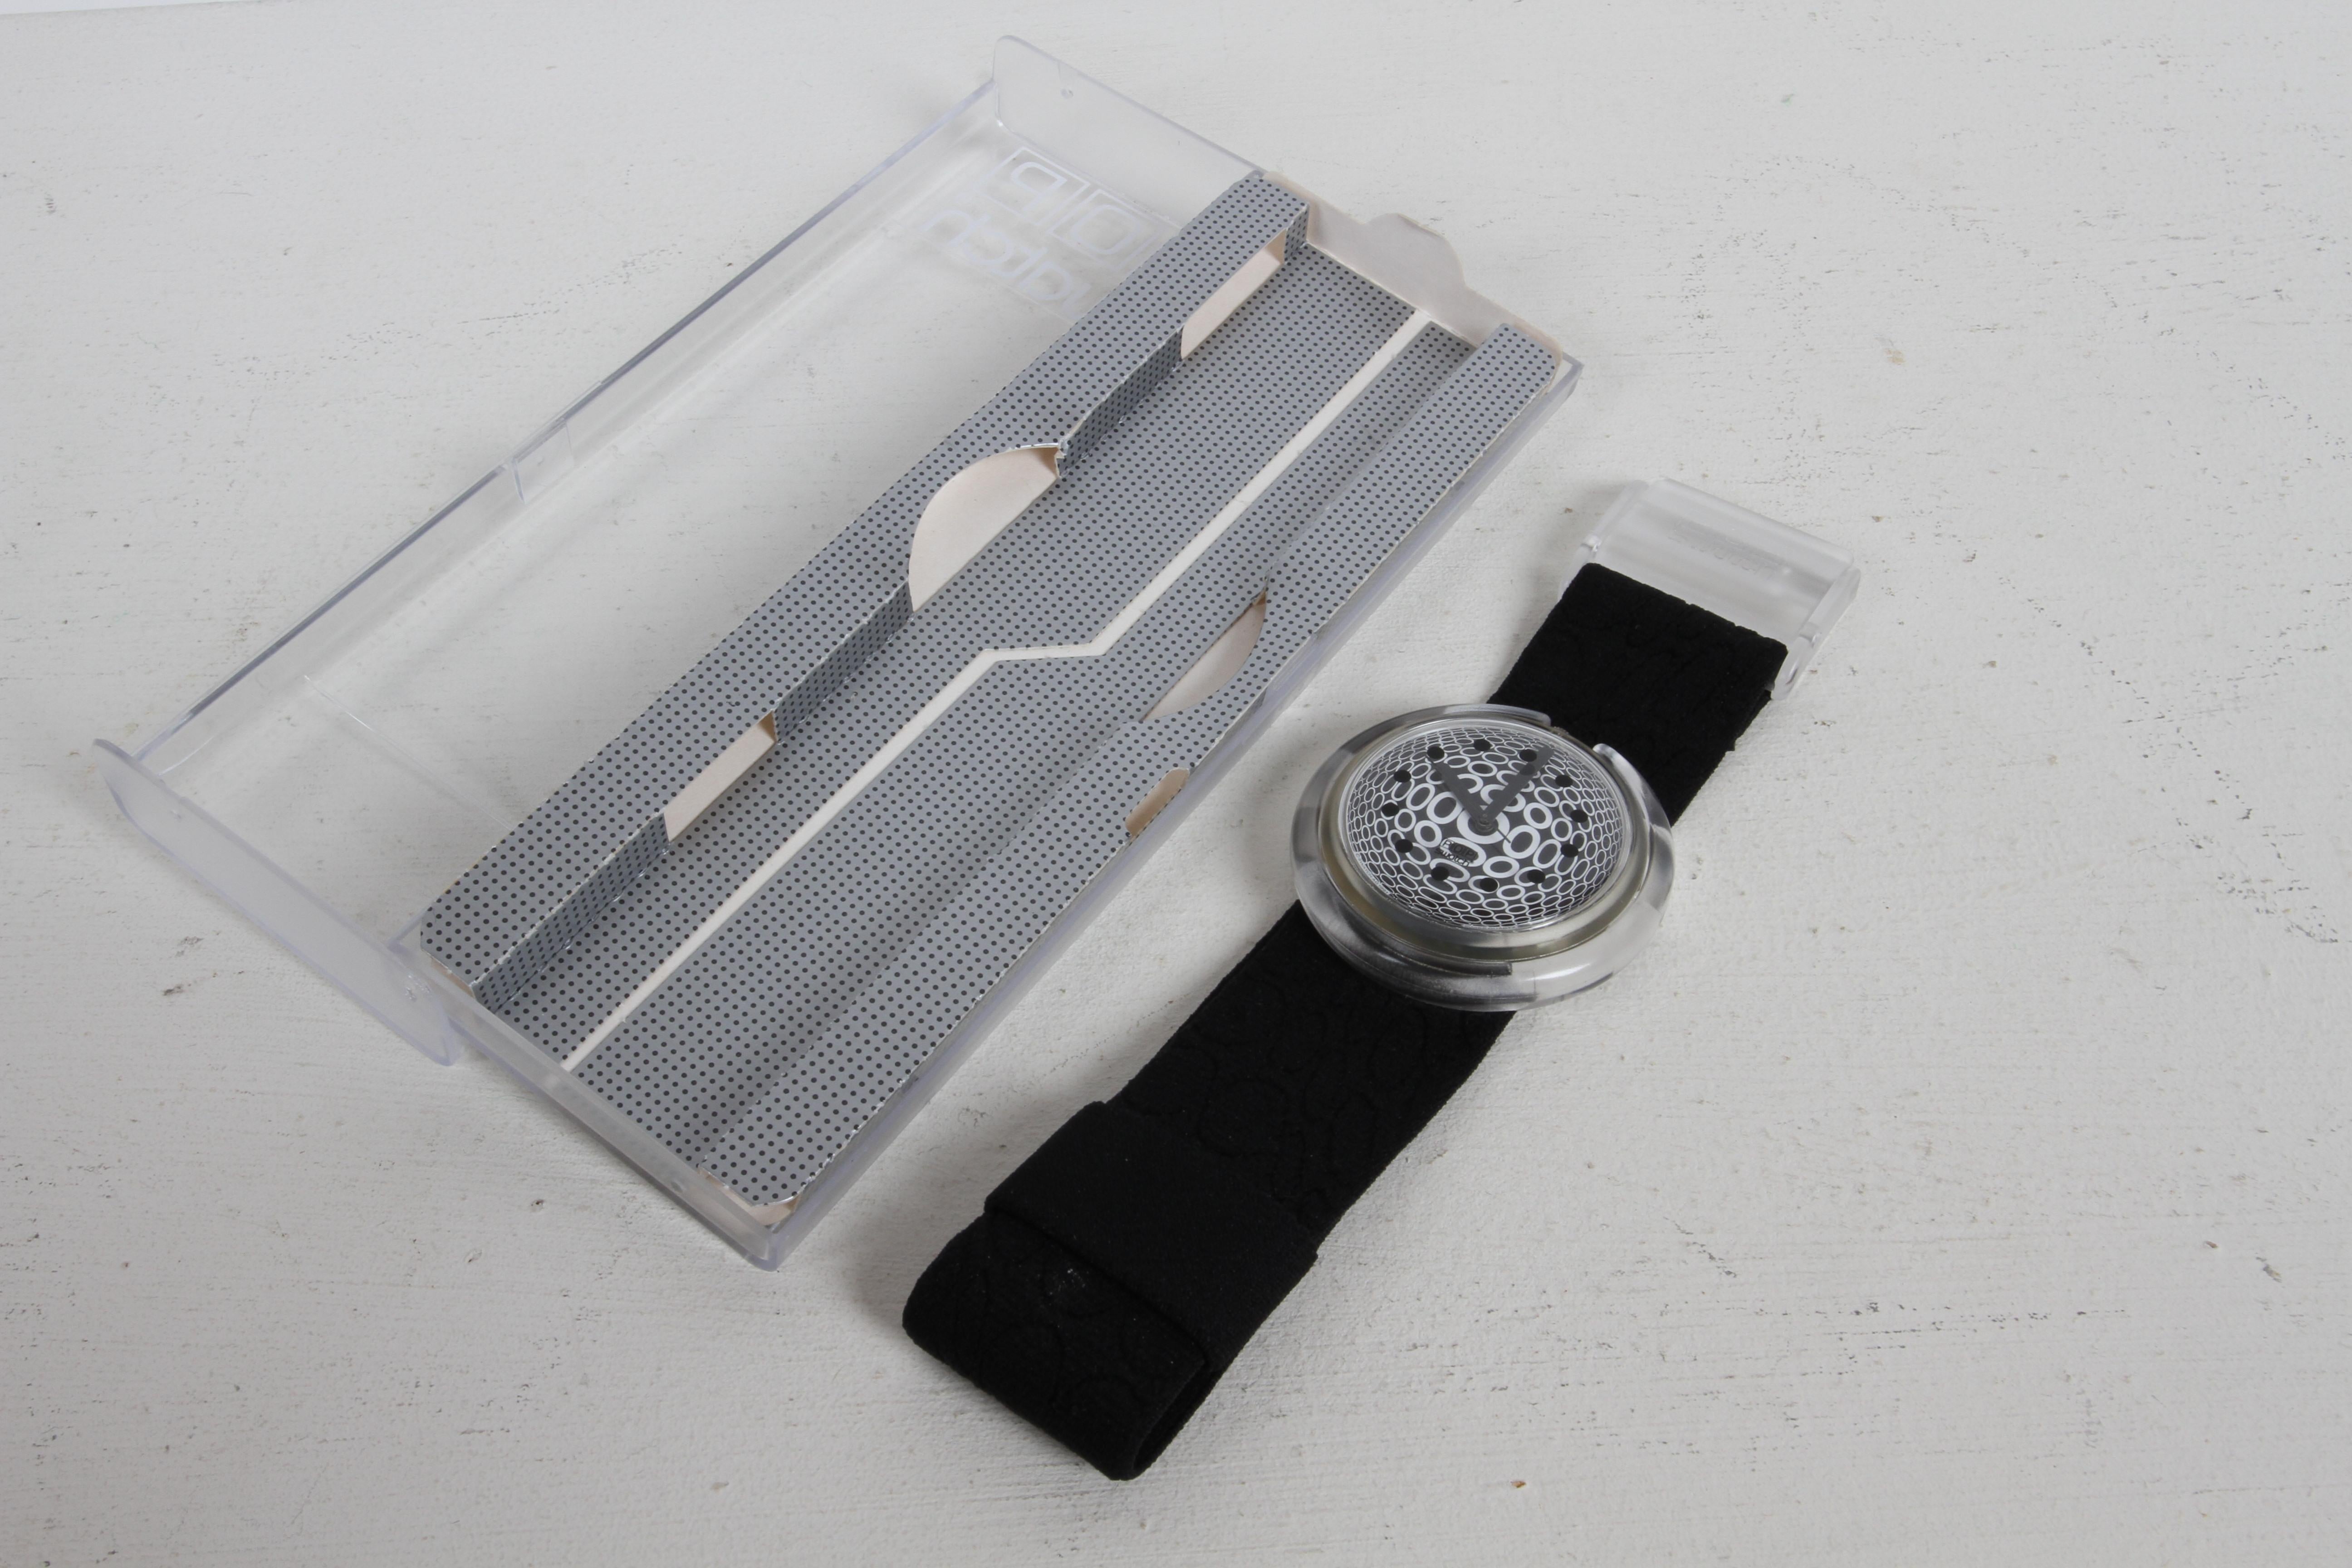 1992 Vintage POP Swatch Watch Special Dots - Op Art - Designed by Vasarely - NOS For Sale 9